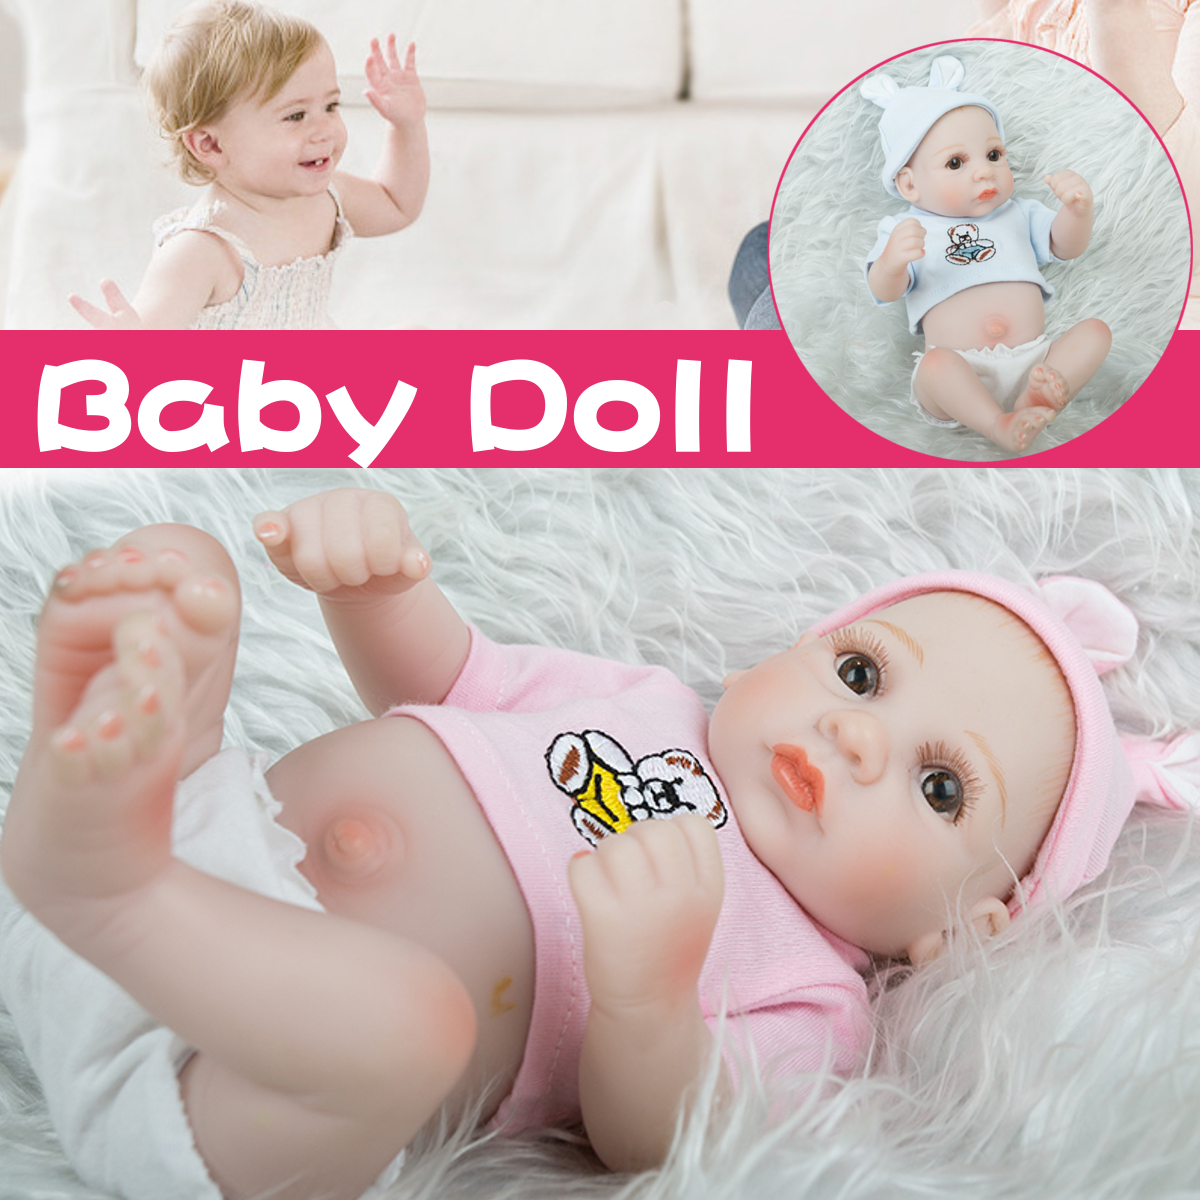 28CM-Silicone-Realistic-Sleeping-Reborns-Lifelike-Newborn-Baby-Doll-Toy-with-Moveable-Head-Arms-And--1817558-1